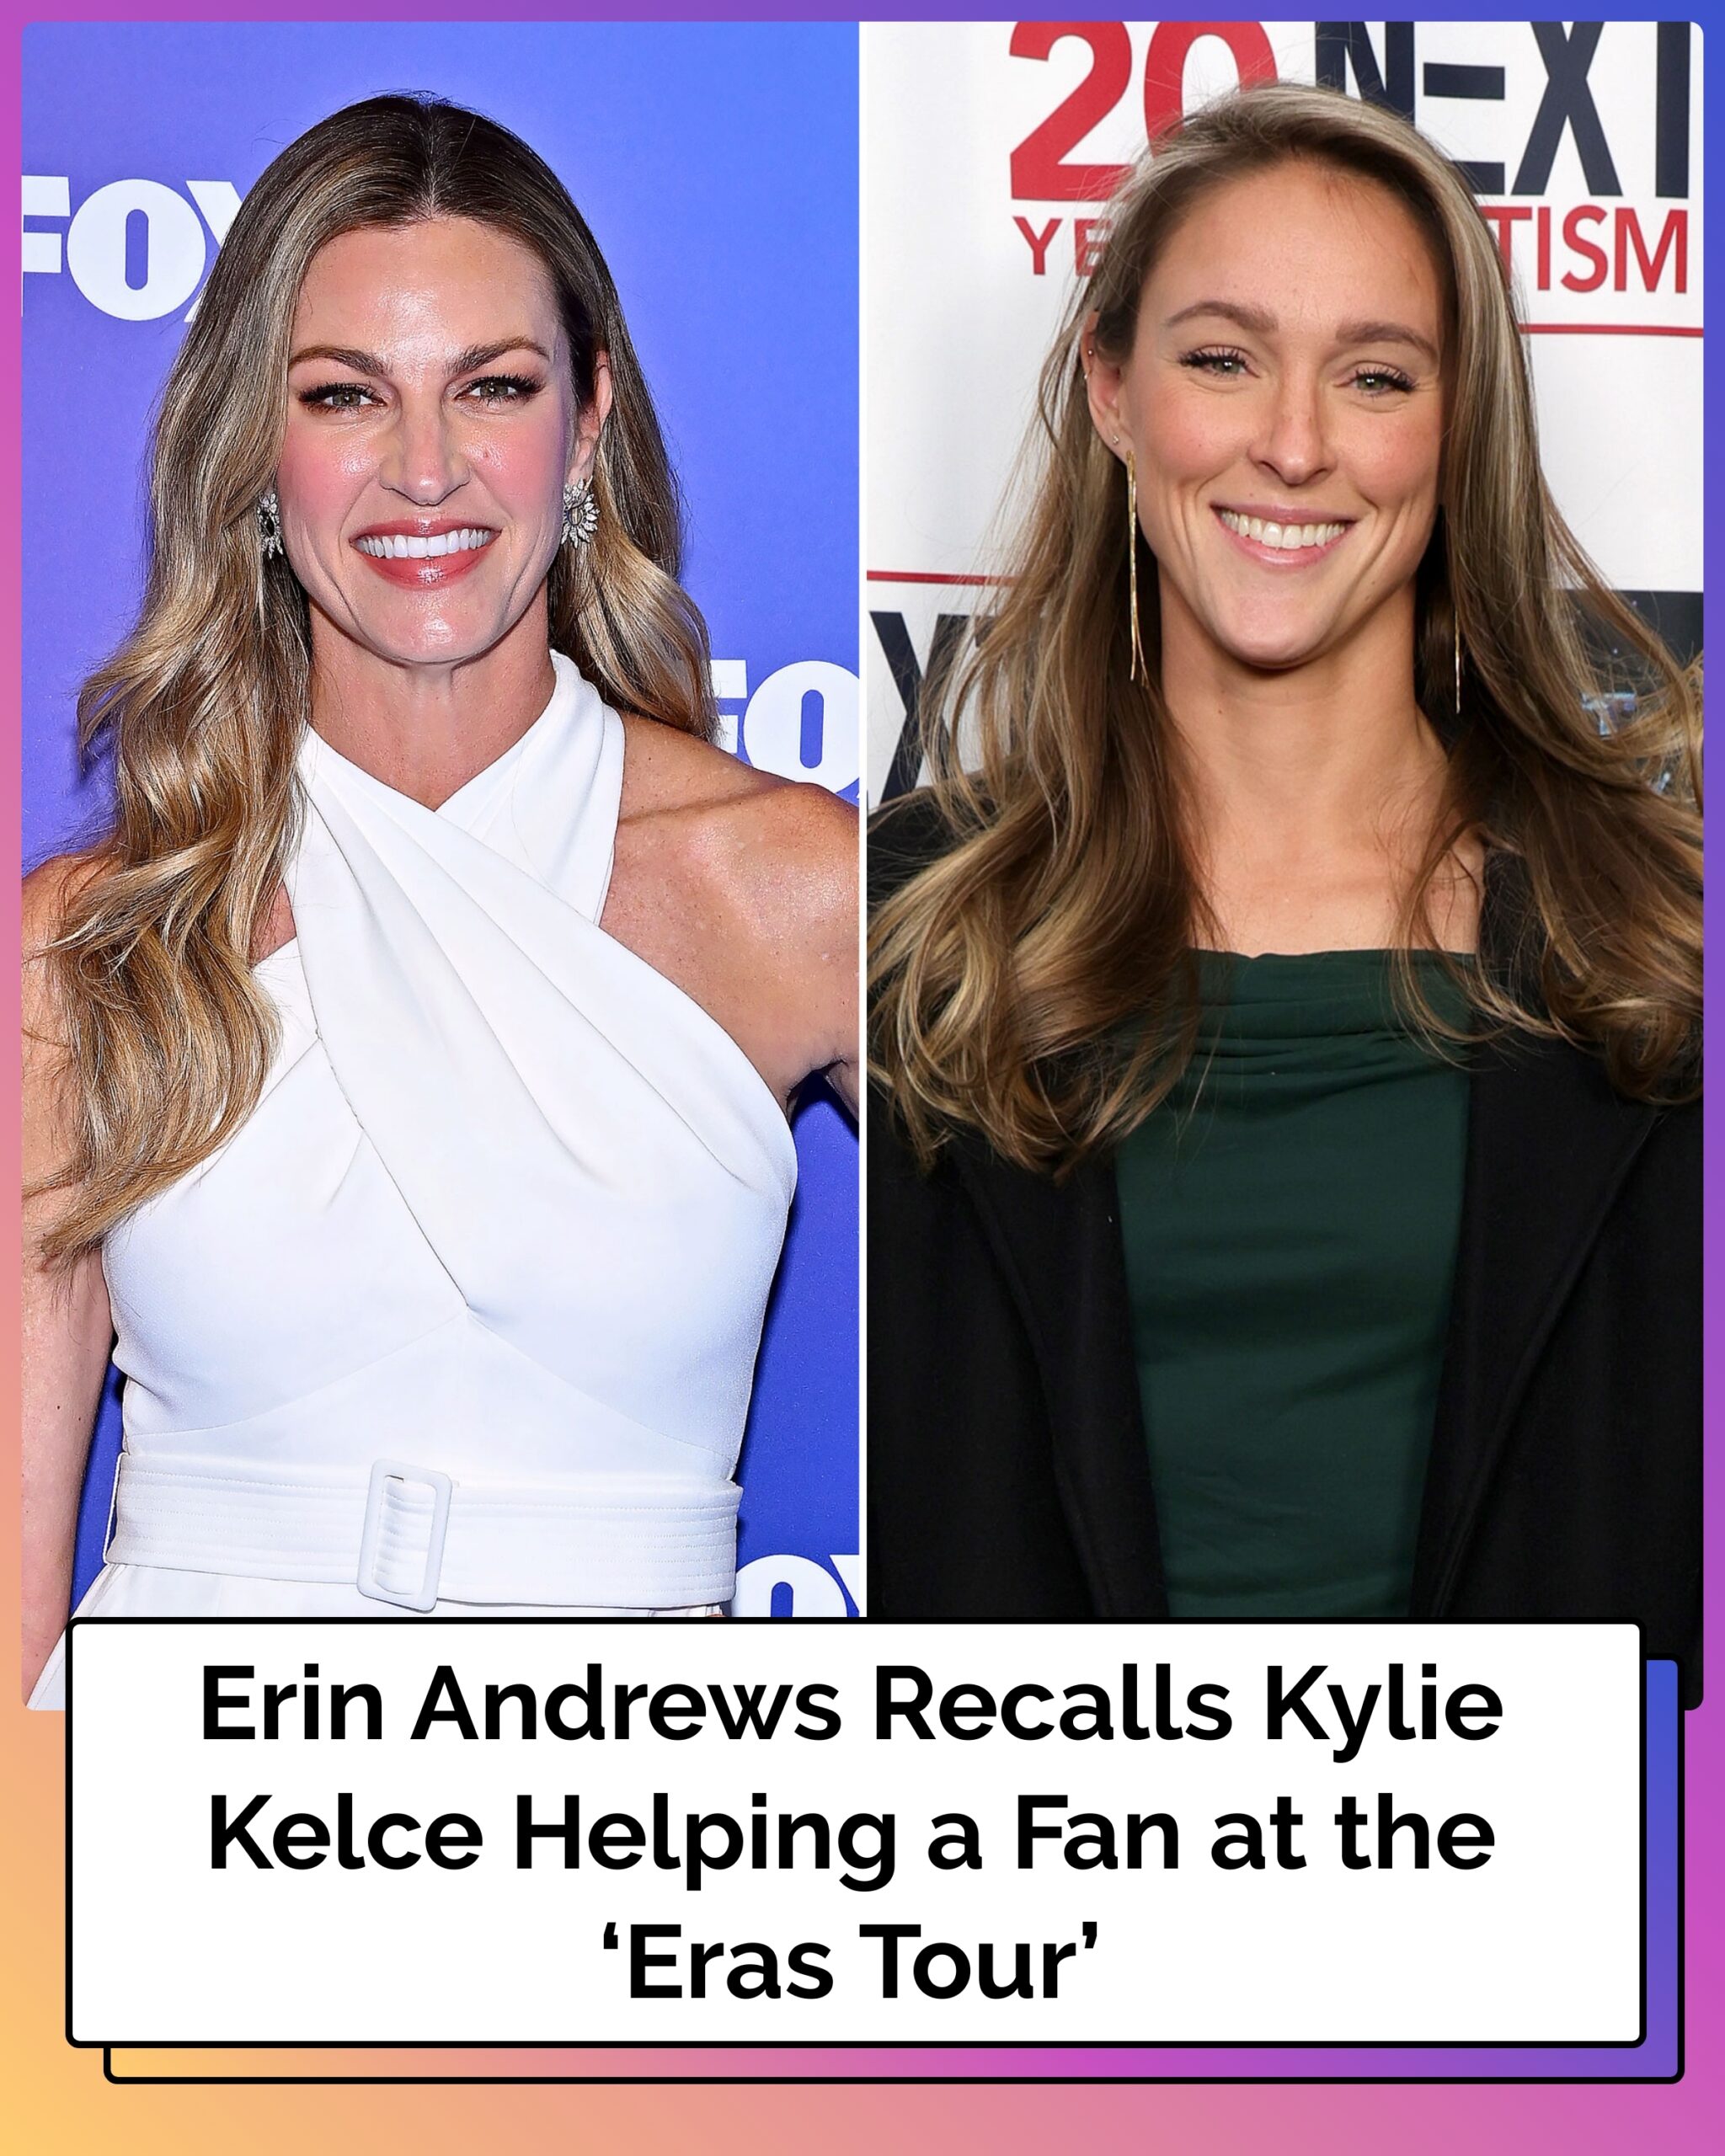 Erin Andrews Recalls Kylie Kelce Helping a Fan at the ‘Eras Tour’